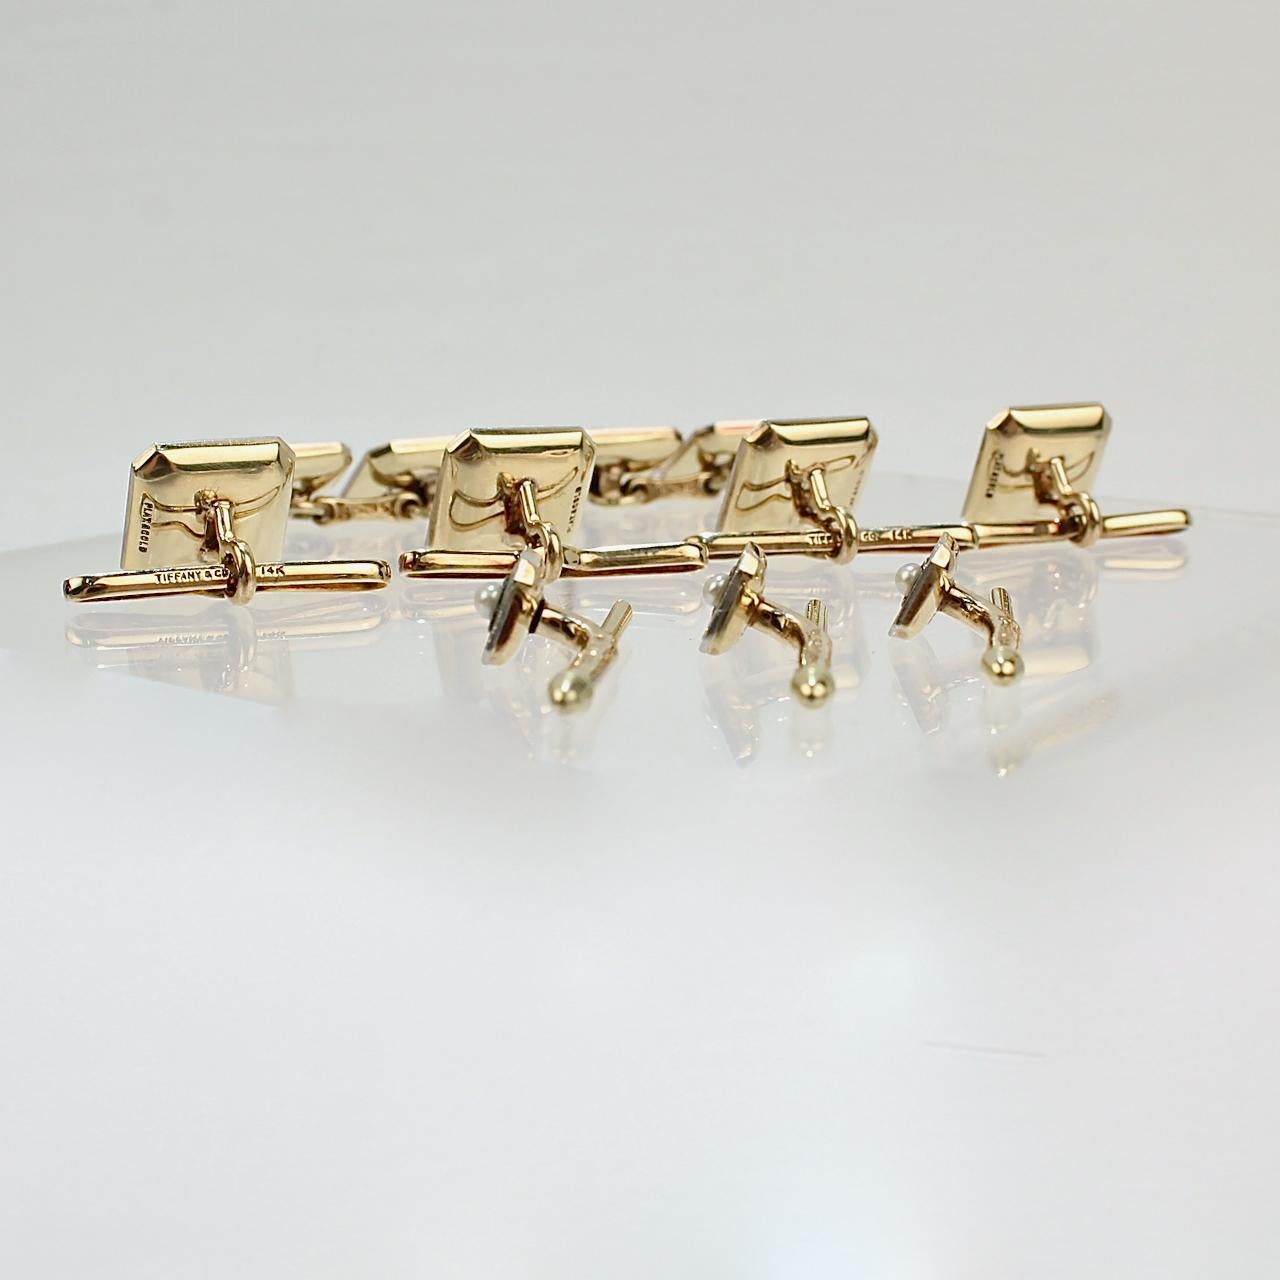 Tiffany & Co Art Deco Cufflink Dress Set in 14K Gold & Platinum with Seed Pearls 3